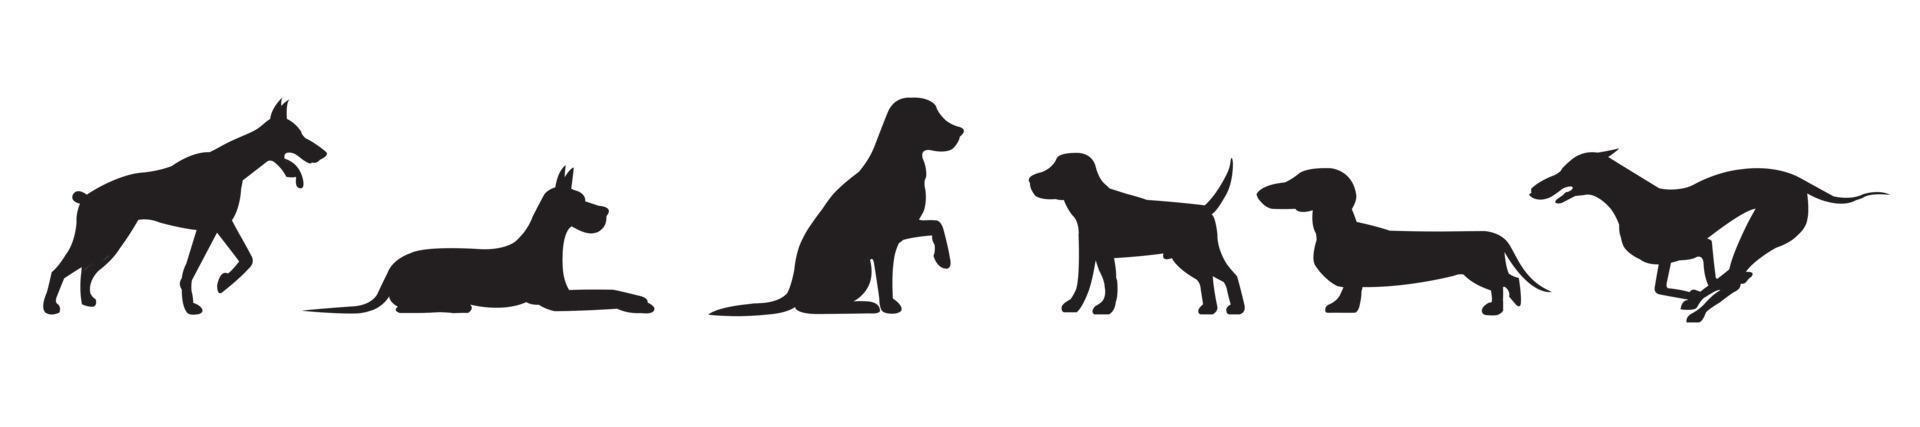 Set with silhouettes of a dog in different positions isolated vector